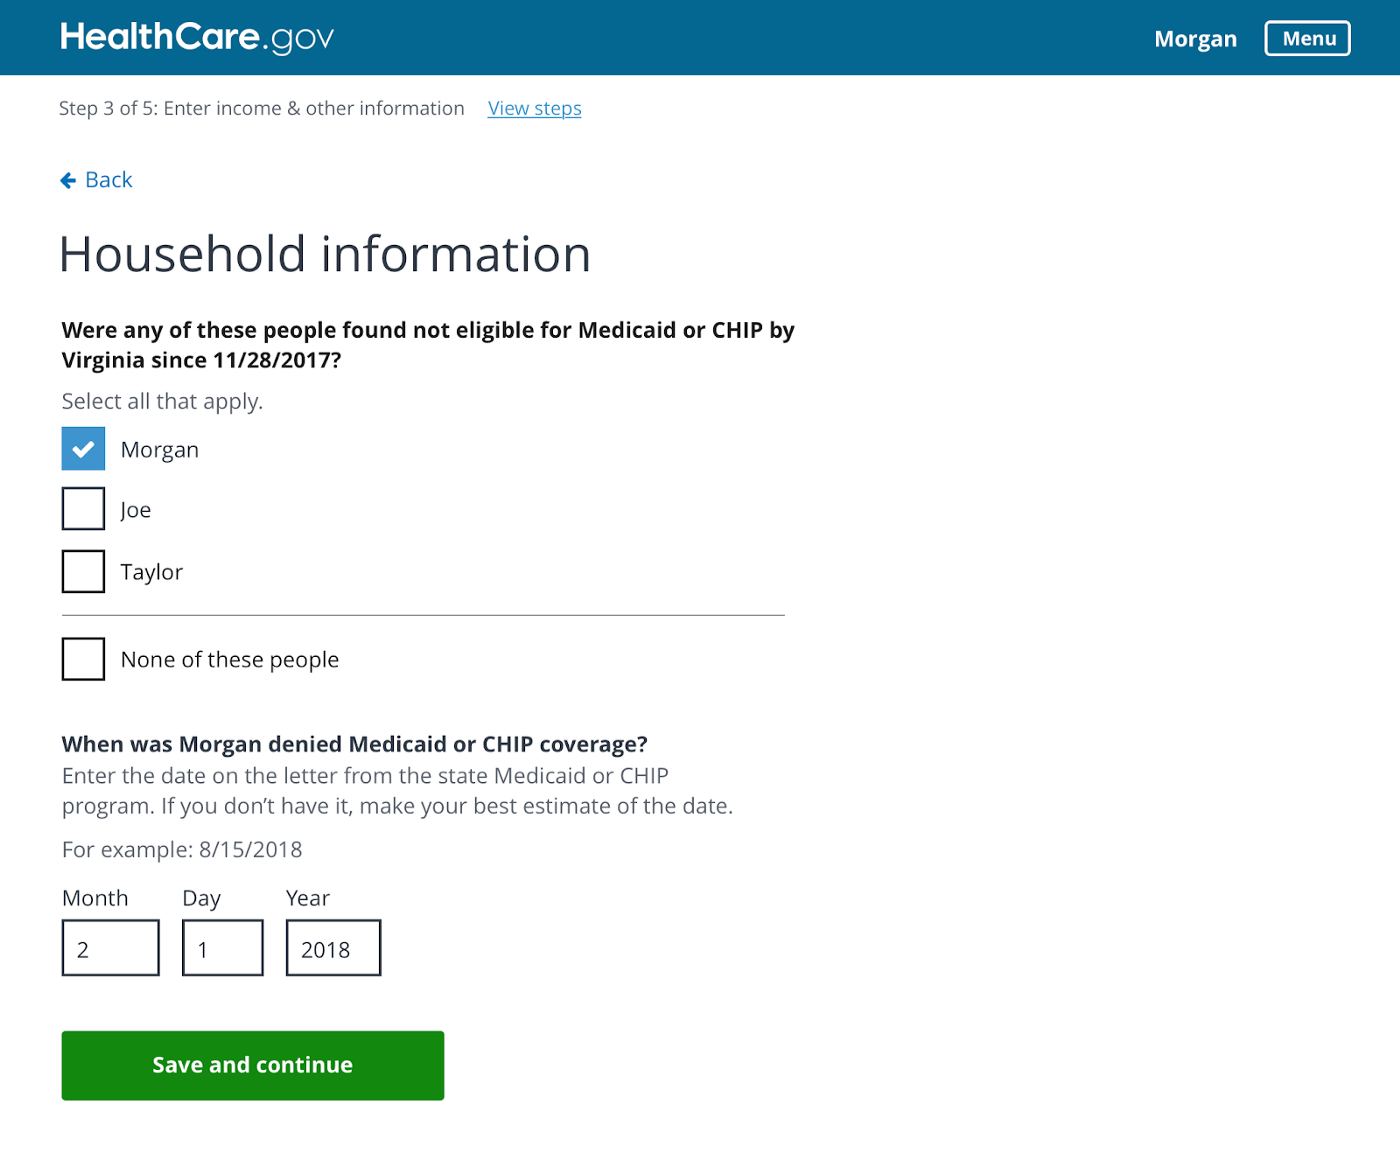 A screenshot of a questions page in the HealthCare.gov application, including questions about members of the applicant's household.